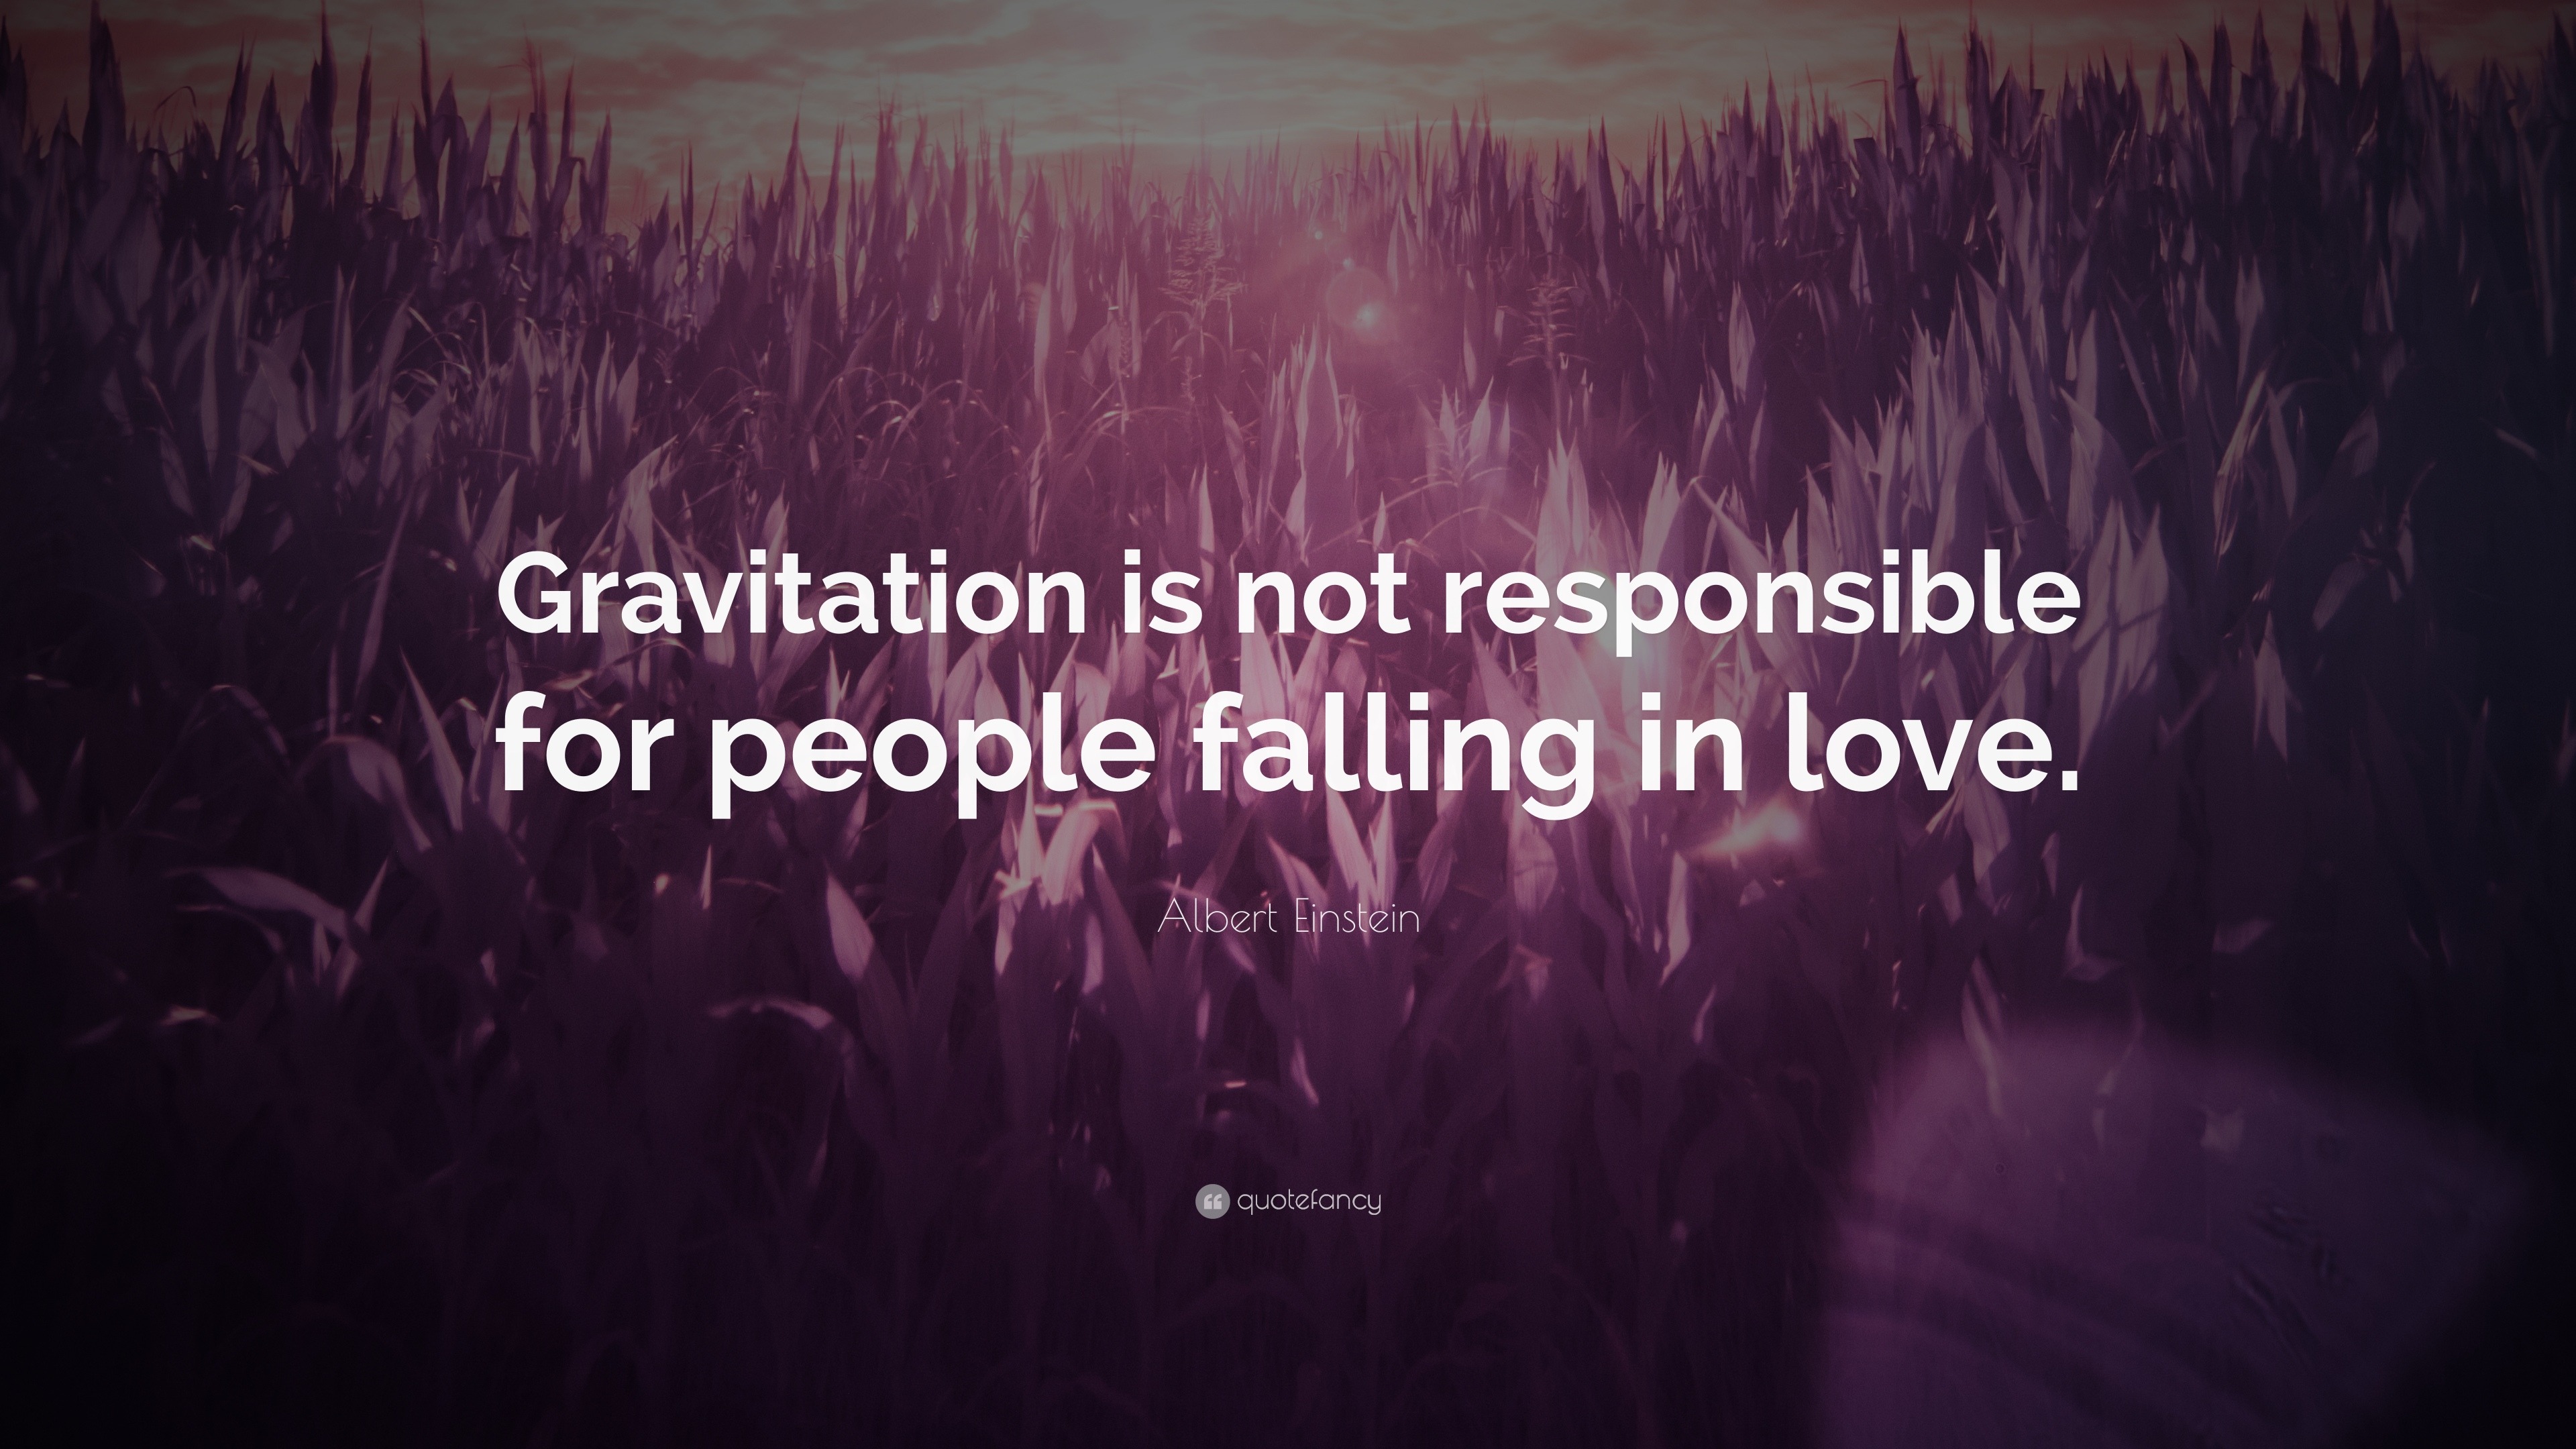 Albert Einstein Quote “Gravitation is not responsible for people falling in love ”